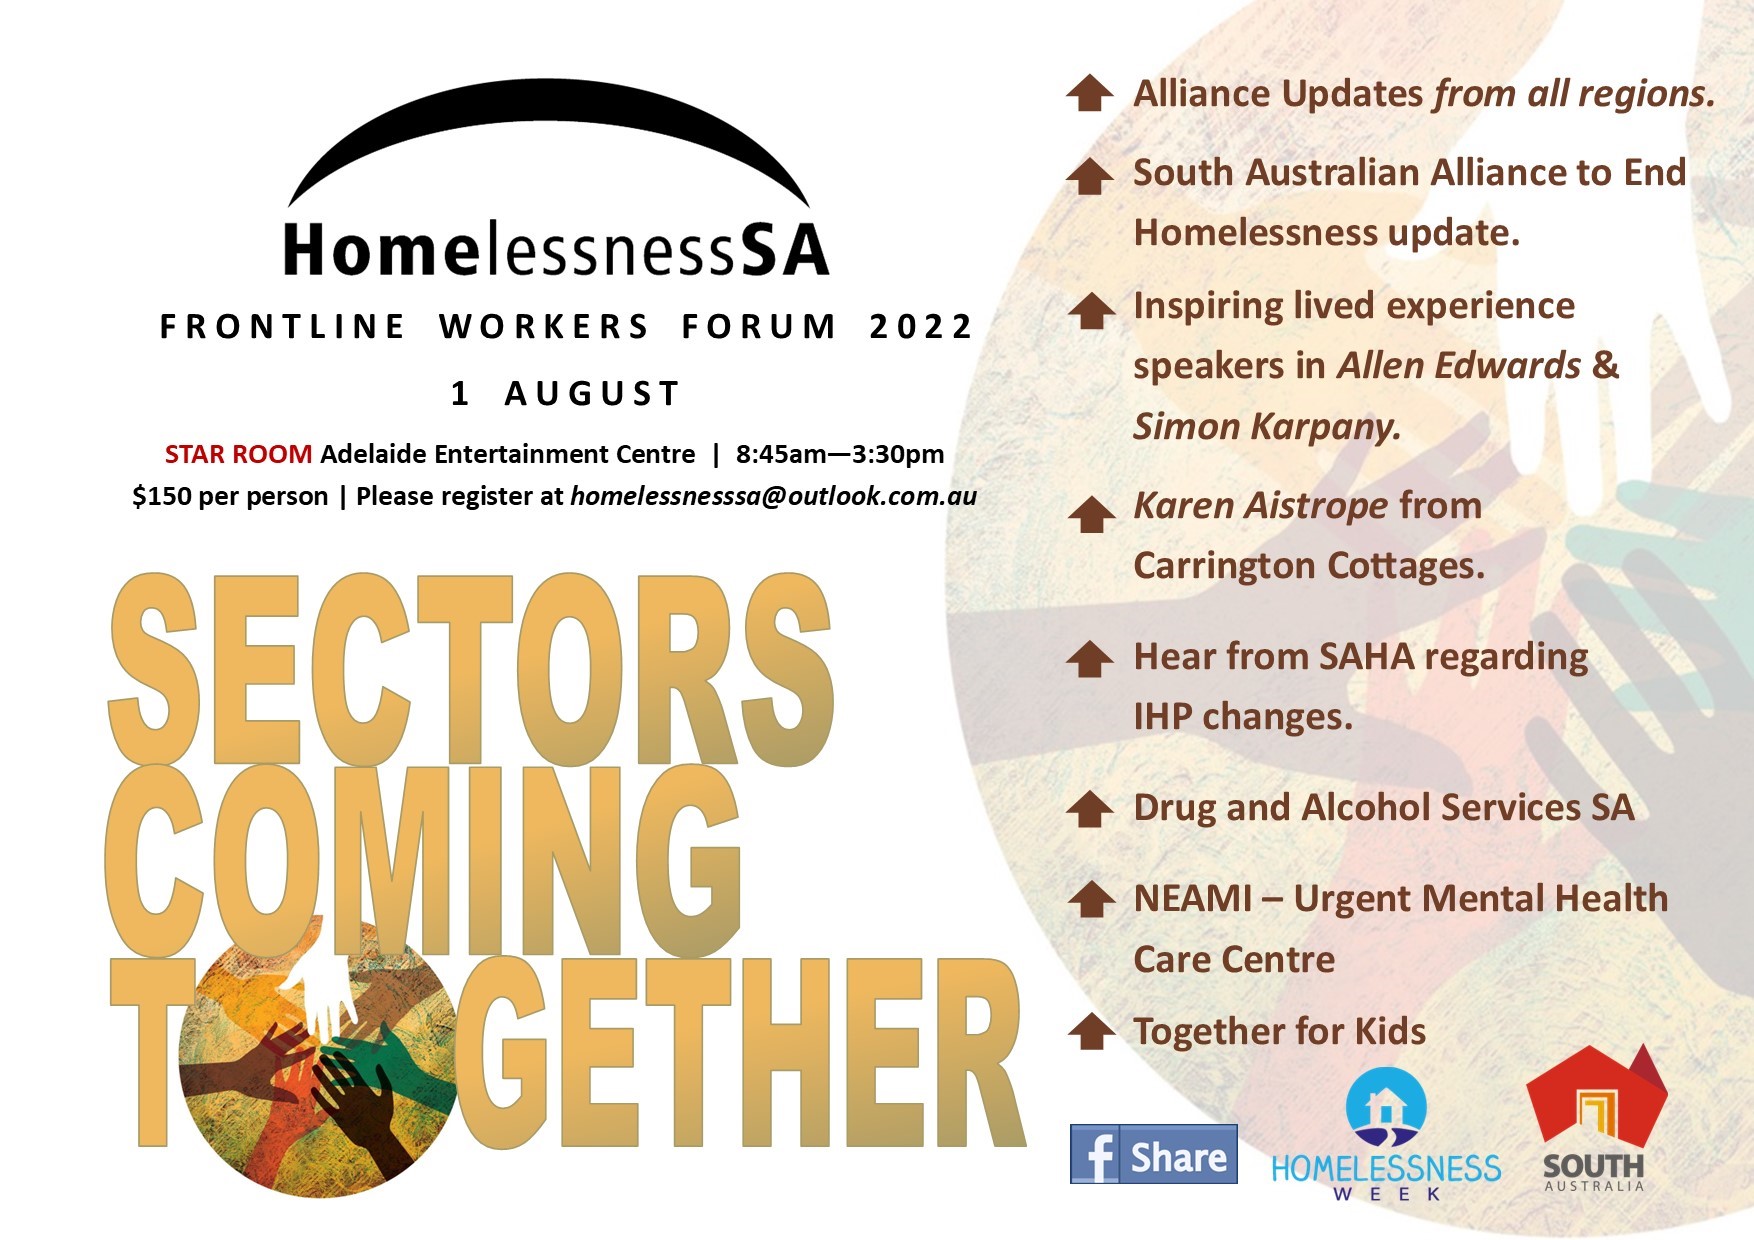 Graphic for the Homelessness SA Frontline Workers Forum 2022. 1 August 2022 at the Adelaide Entertainment Centre.